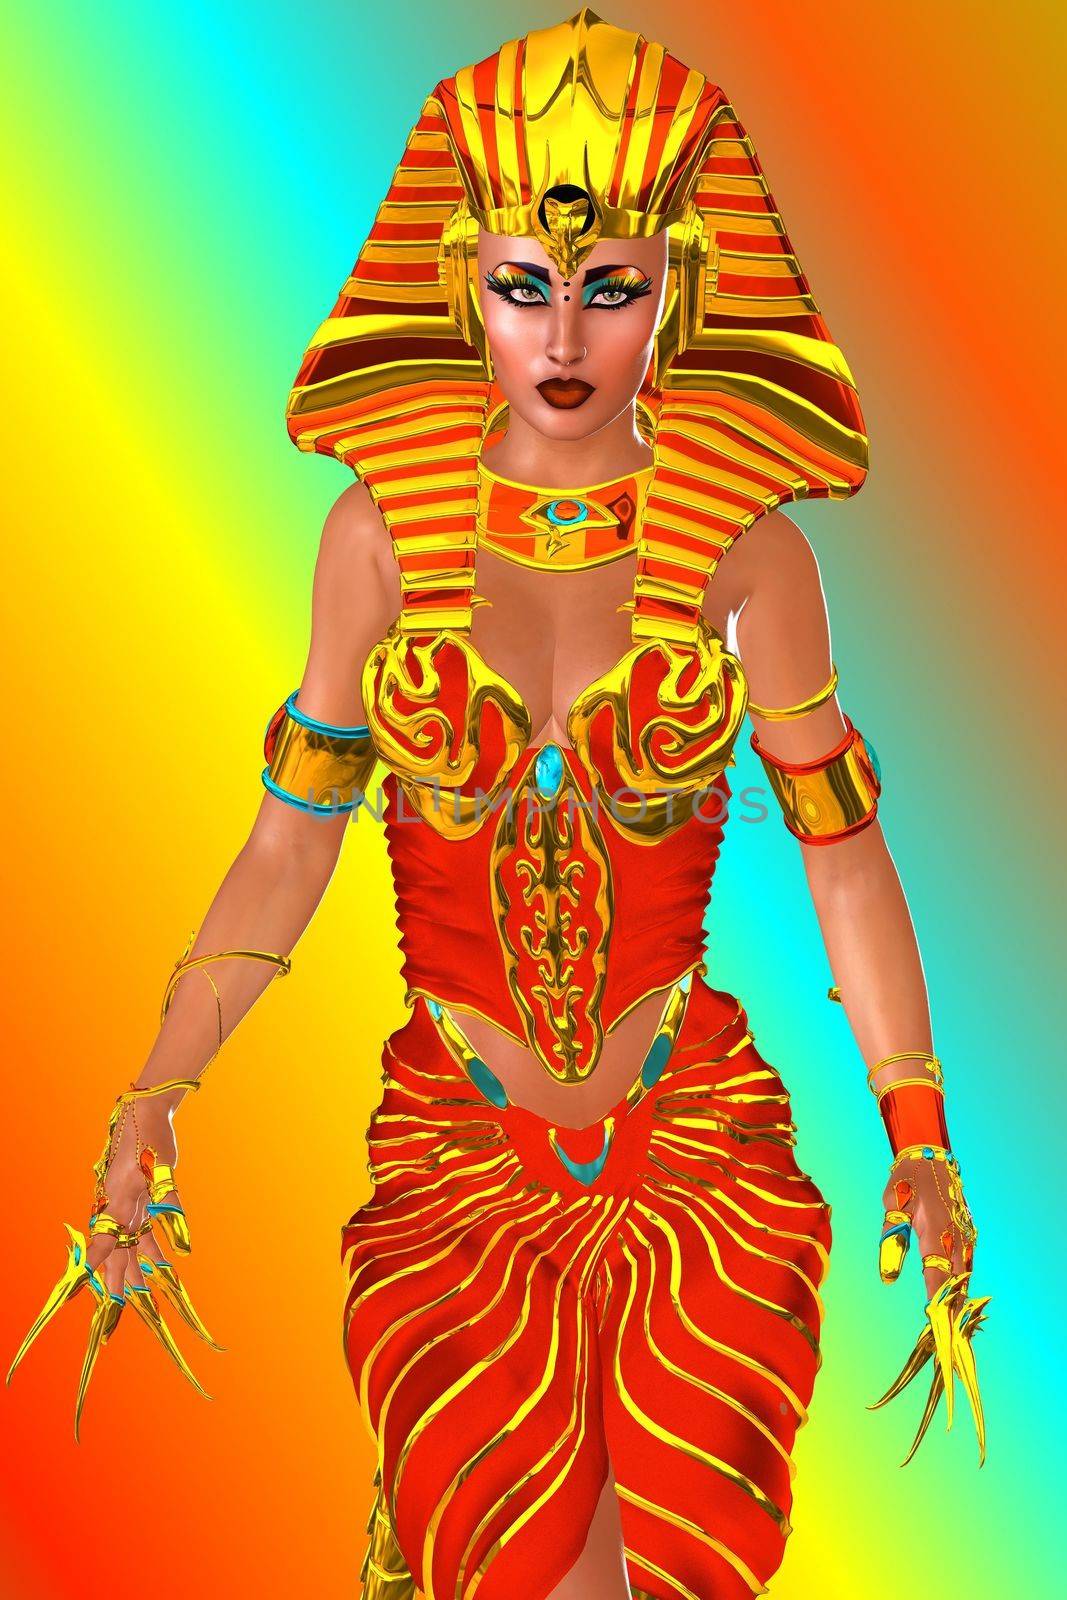 A conceptual image of a beautiful Pharaoh Queen standing in a powerful posture. Her body is adorned with jewels including long golden finger nail accessories. Her red dress is also laced with gold.